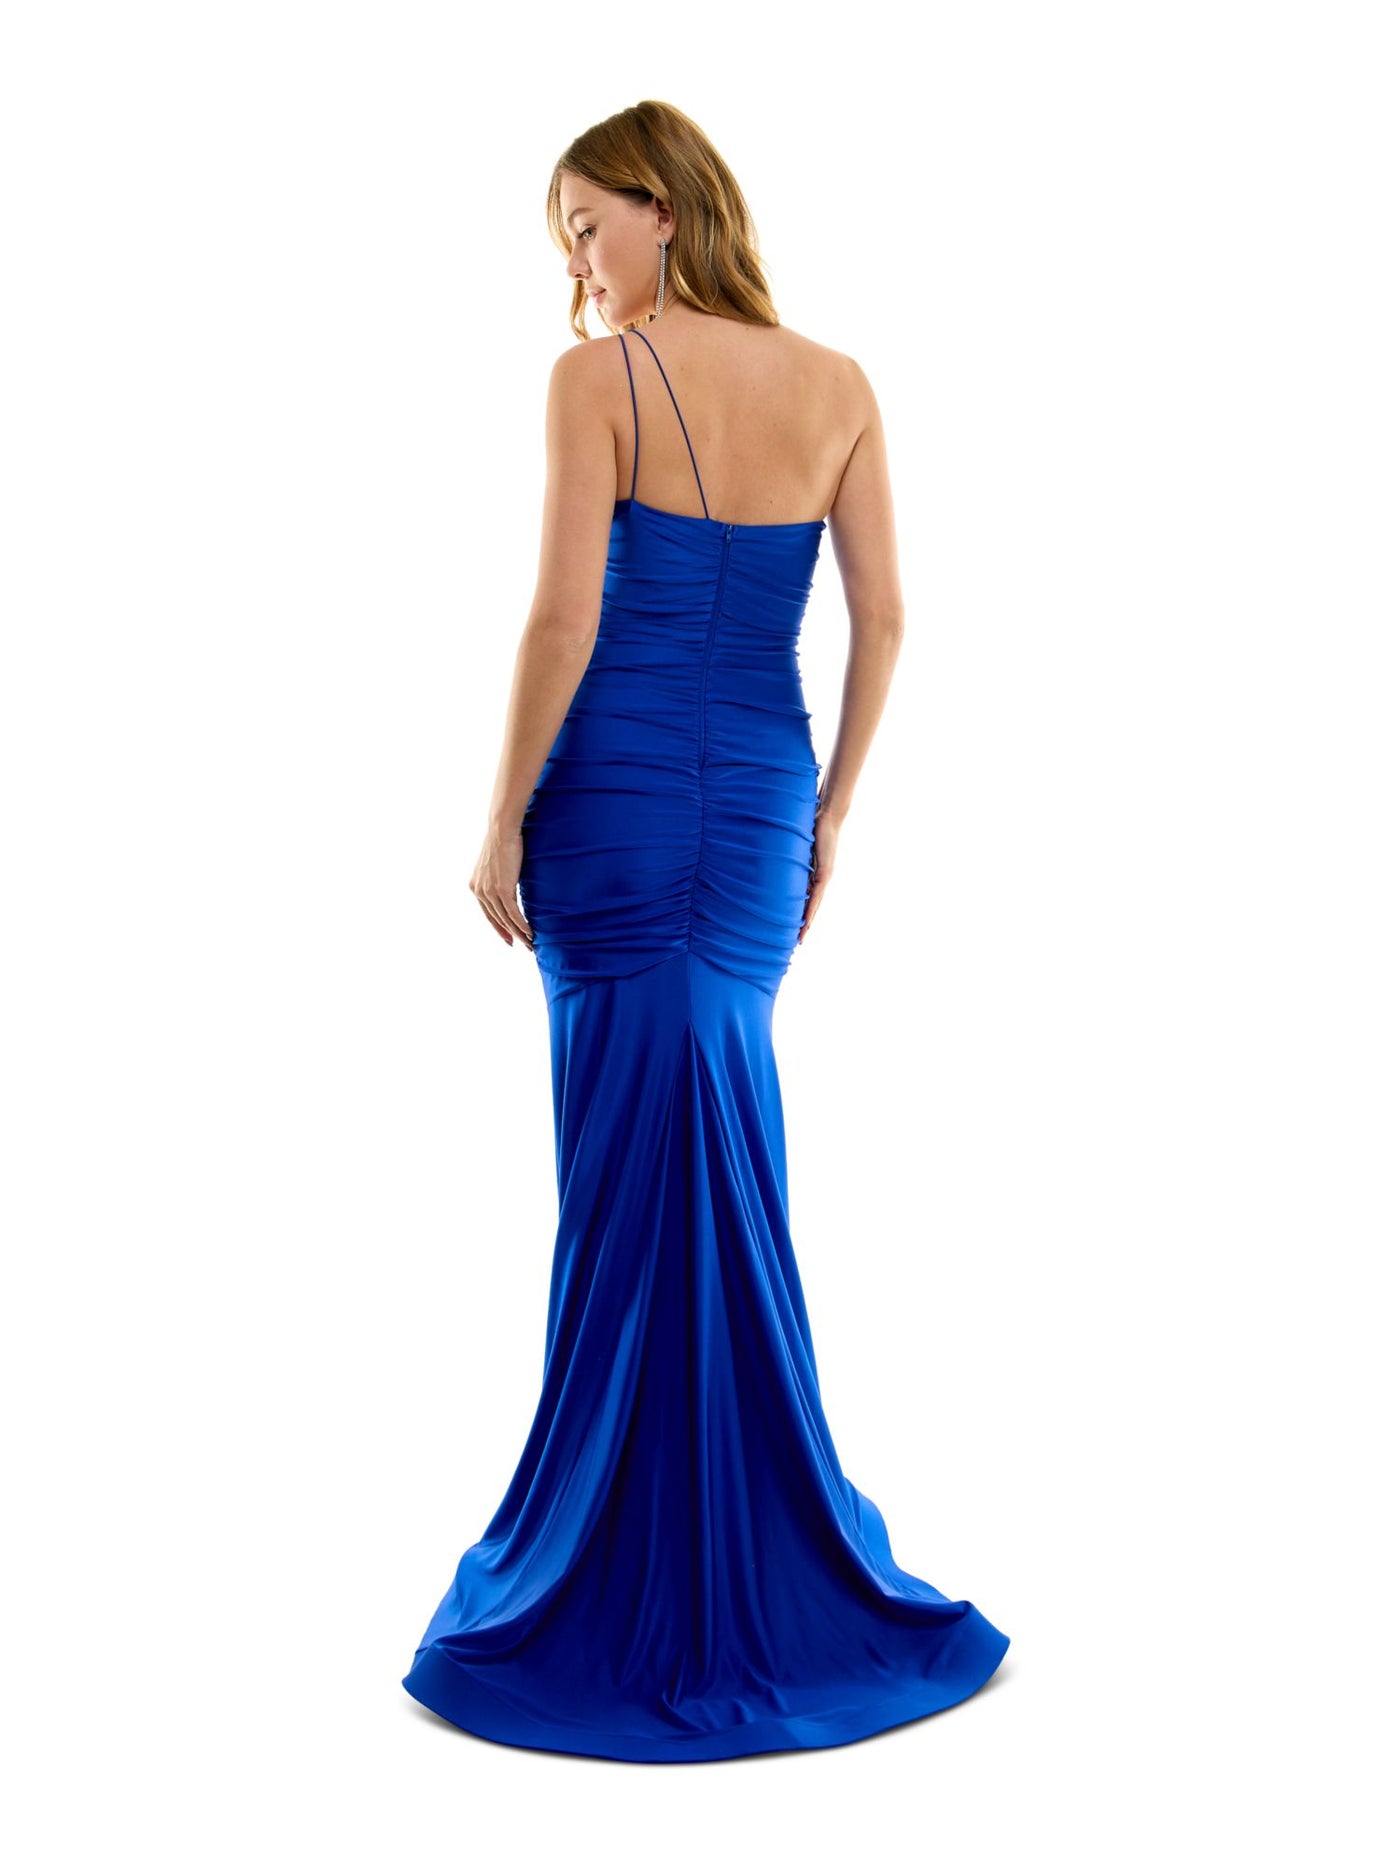 B DARLIN Womens Blue Zippered Ruched Padded Lined Fitted Spaghetti Strap Asymmetrical Neckline Full-Length Party Gown Dress Juniors 0